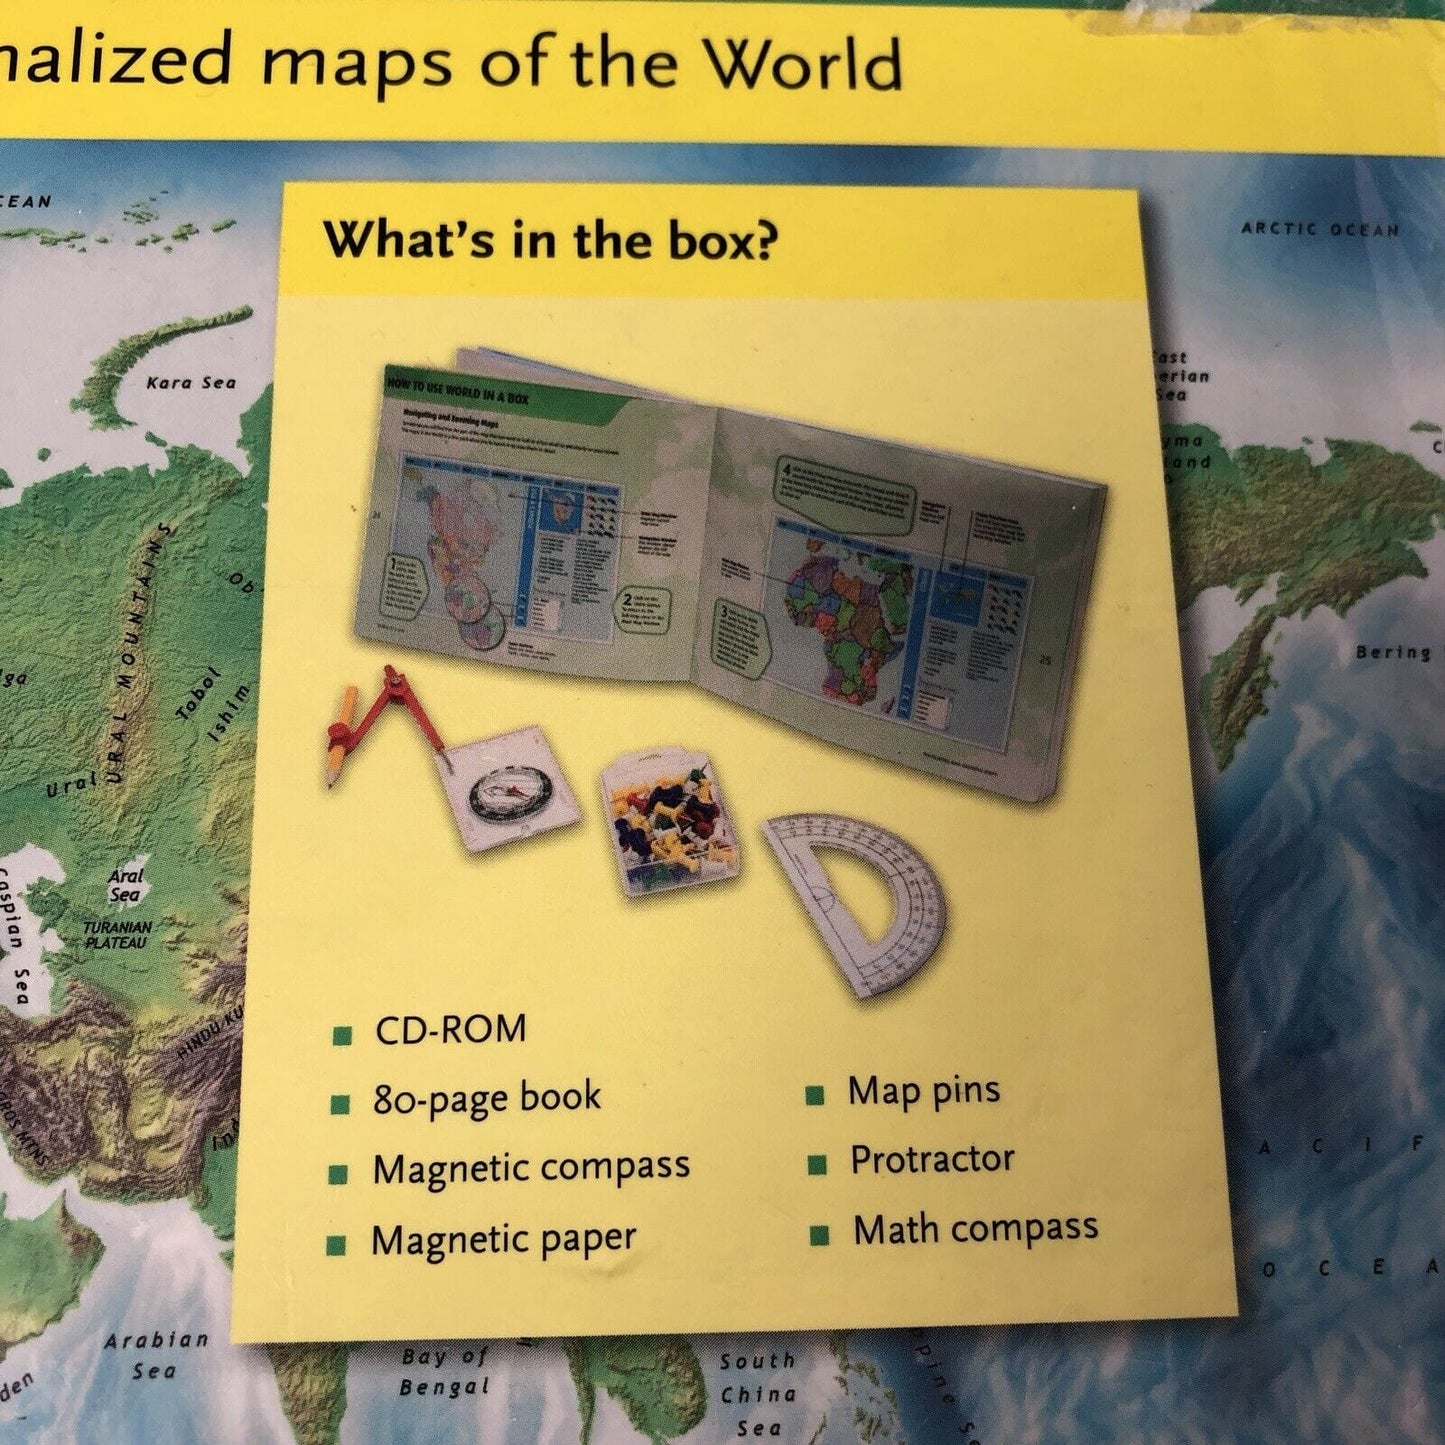 Sterling Publishing World In A Box Create & Print Your Own World Maps Ages 8 +